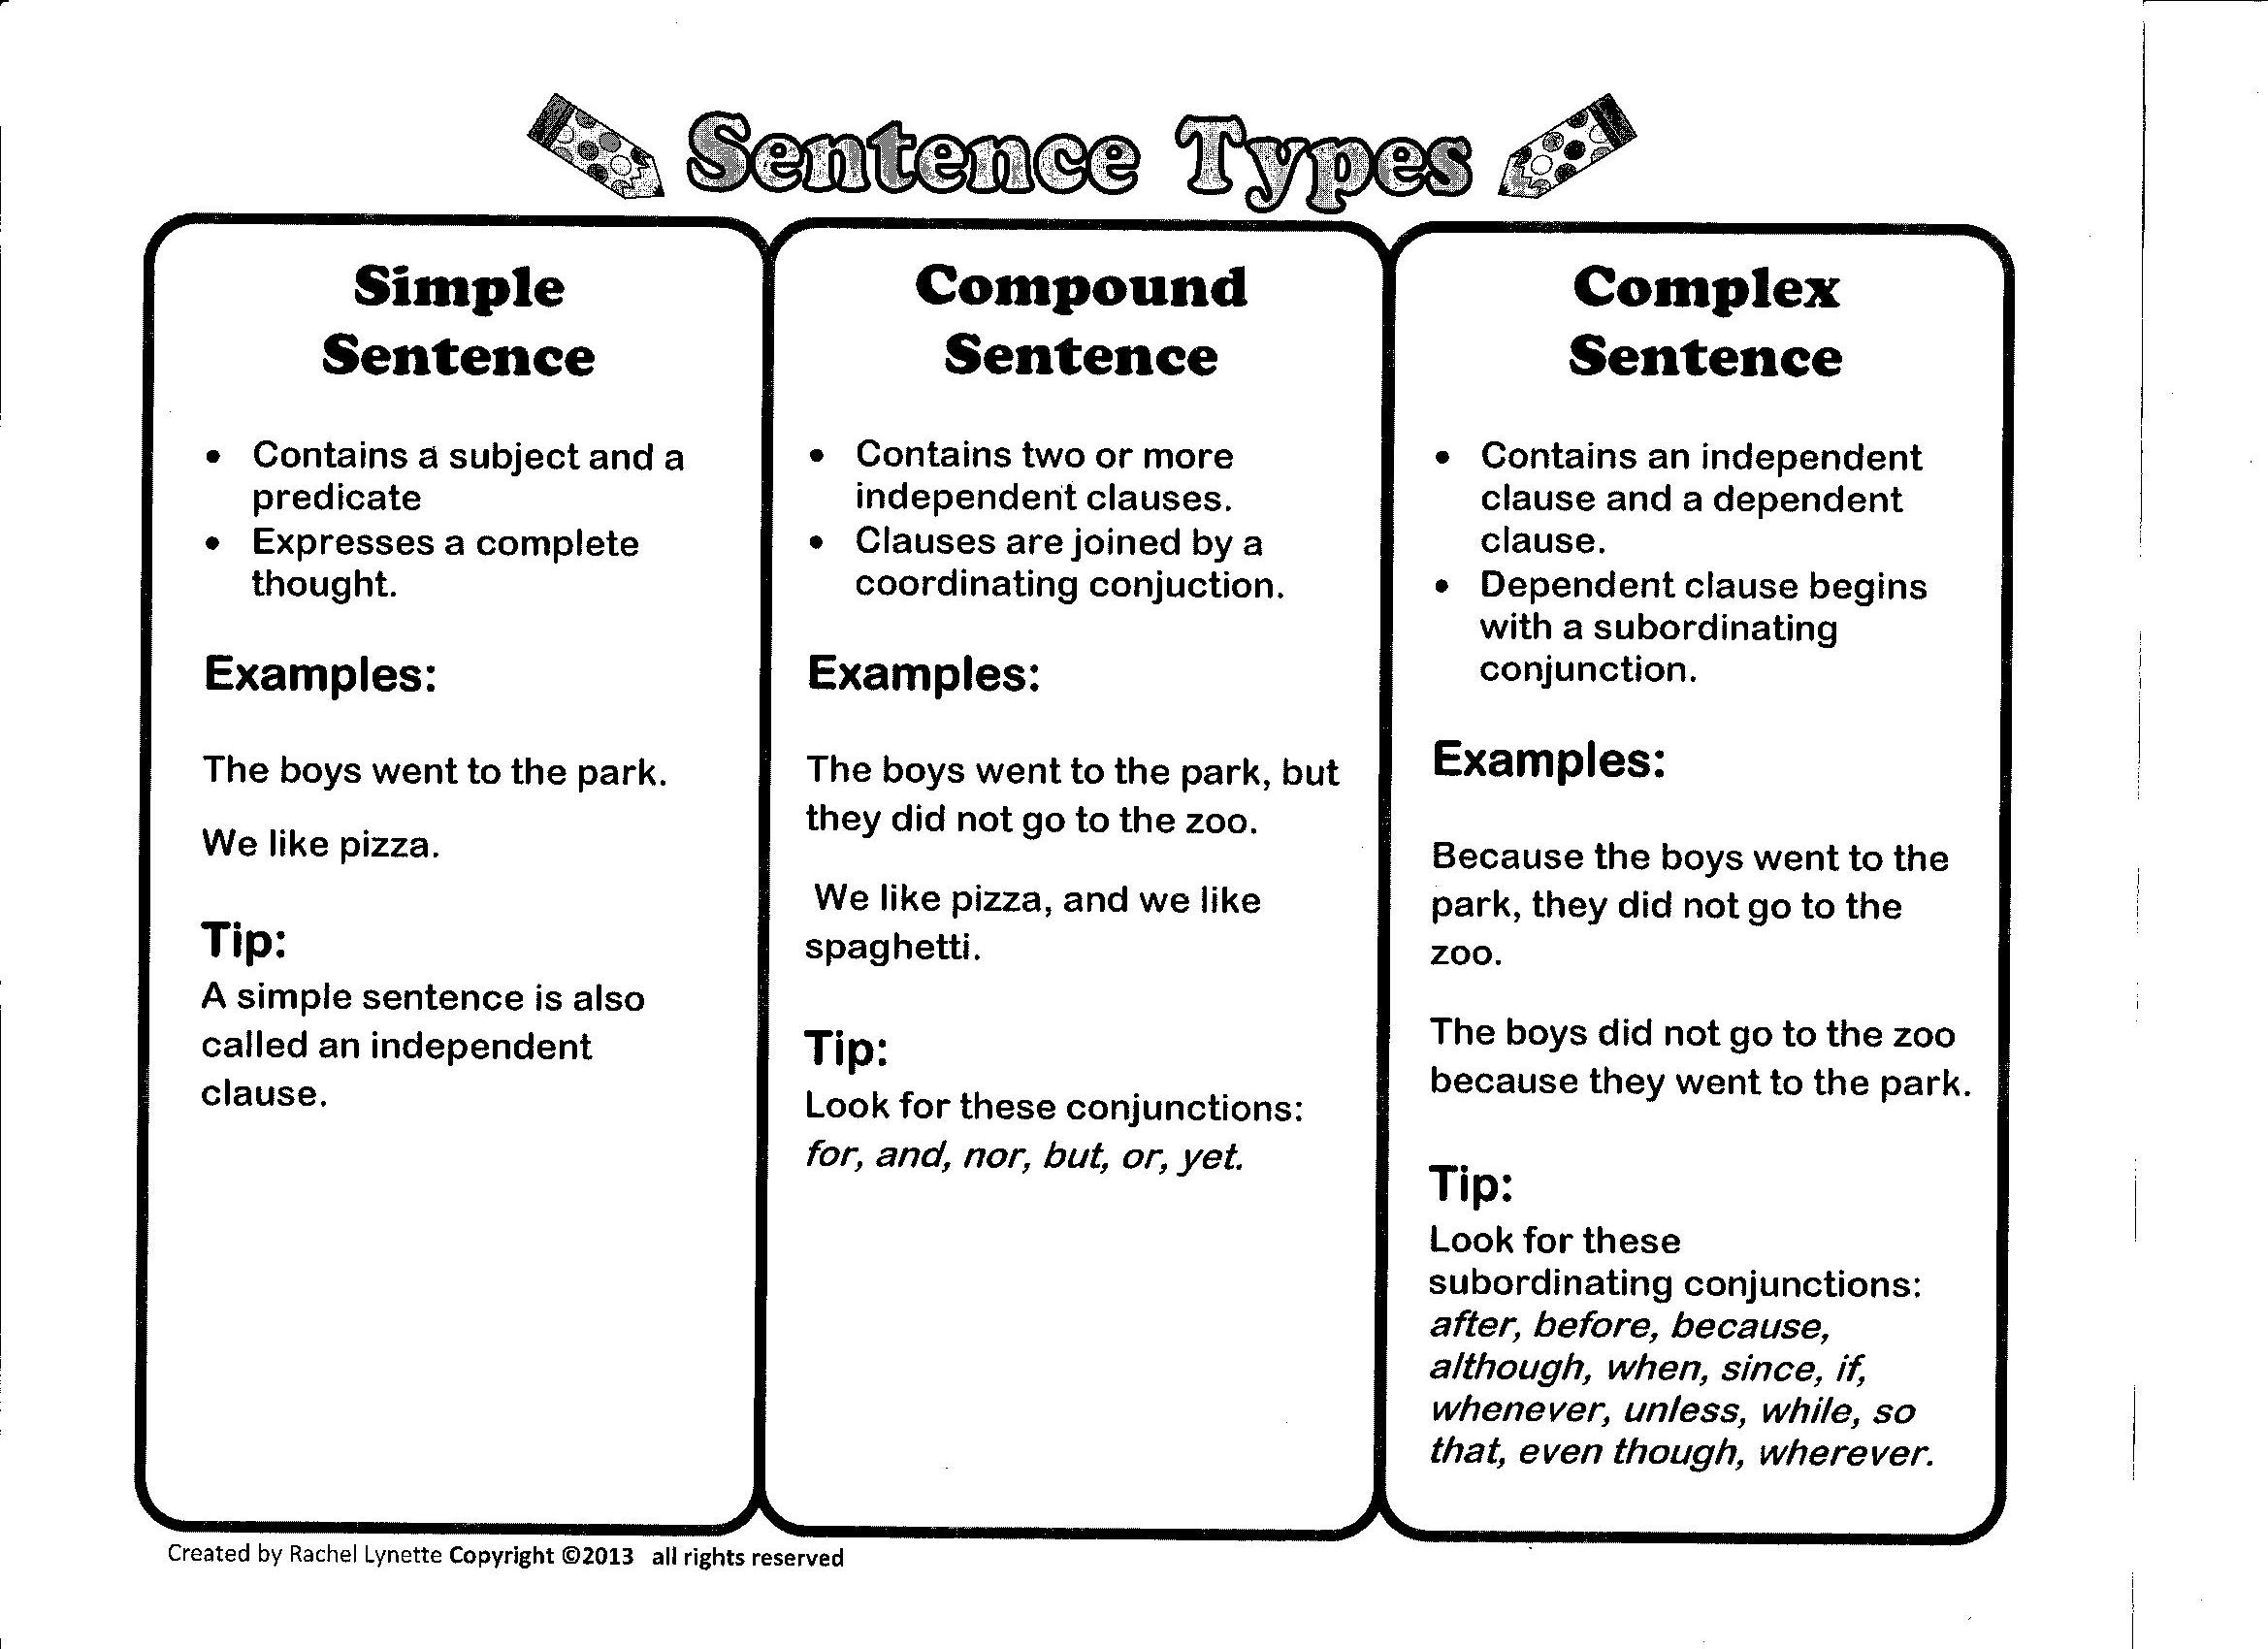 Simple Compound Complex Sentence Examples Image